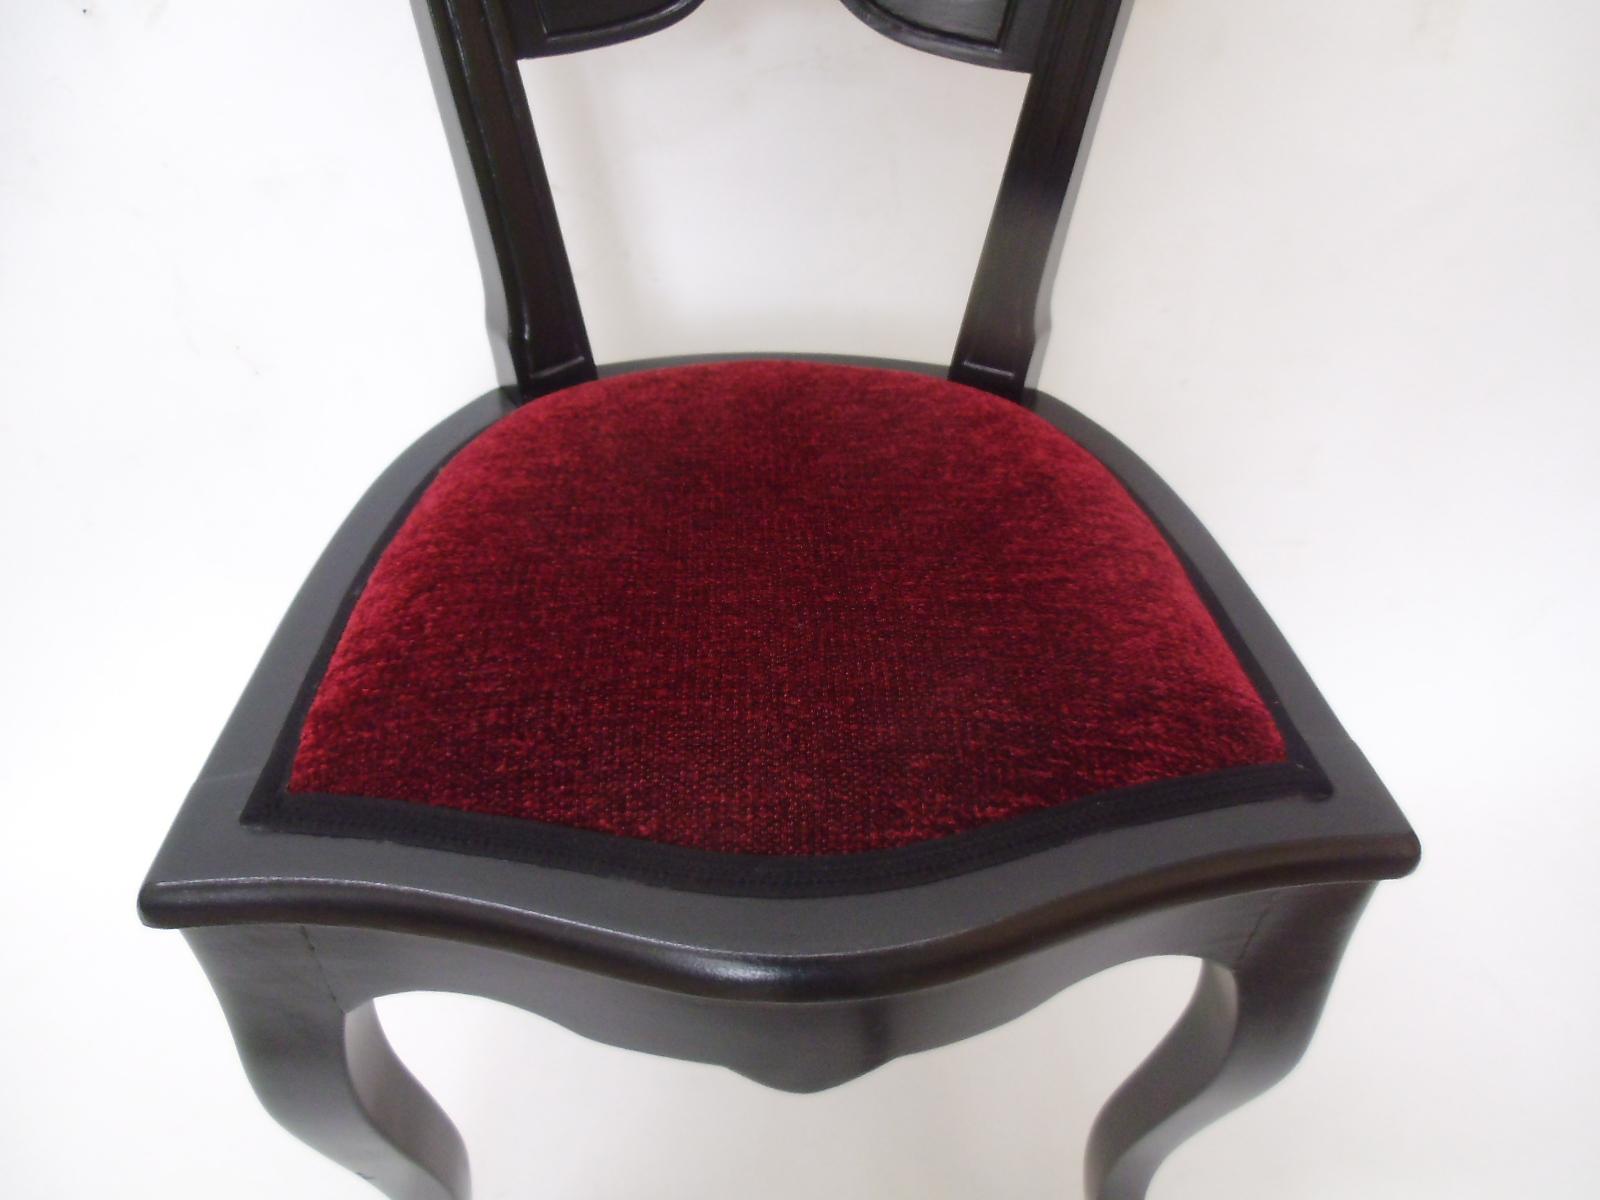 Elegant single piece Baroque chair with a black stained frame and new, red velvet upholstery. Features a classical Baroque design an elegantly carved backrest and wonderfully curved legs. Restored by hand with only high quality materials and very